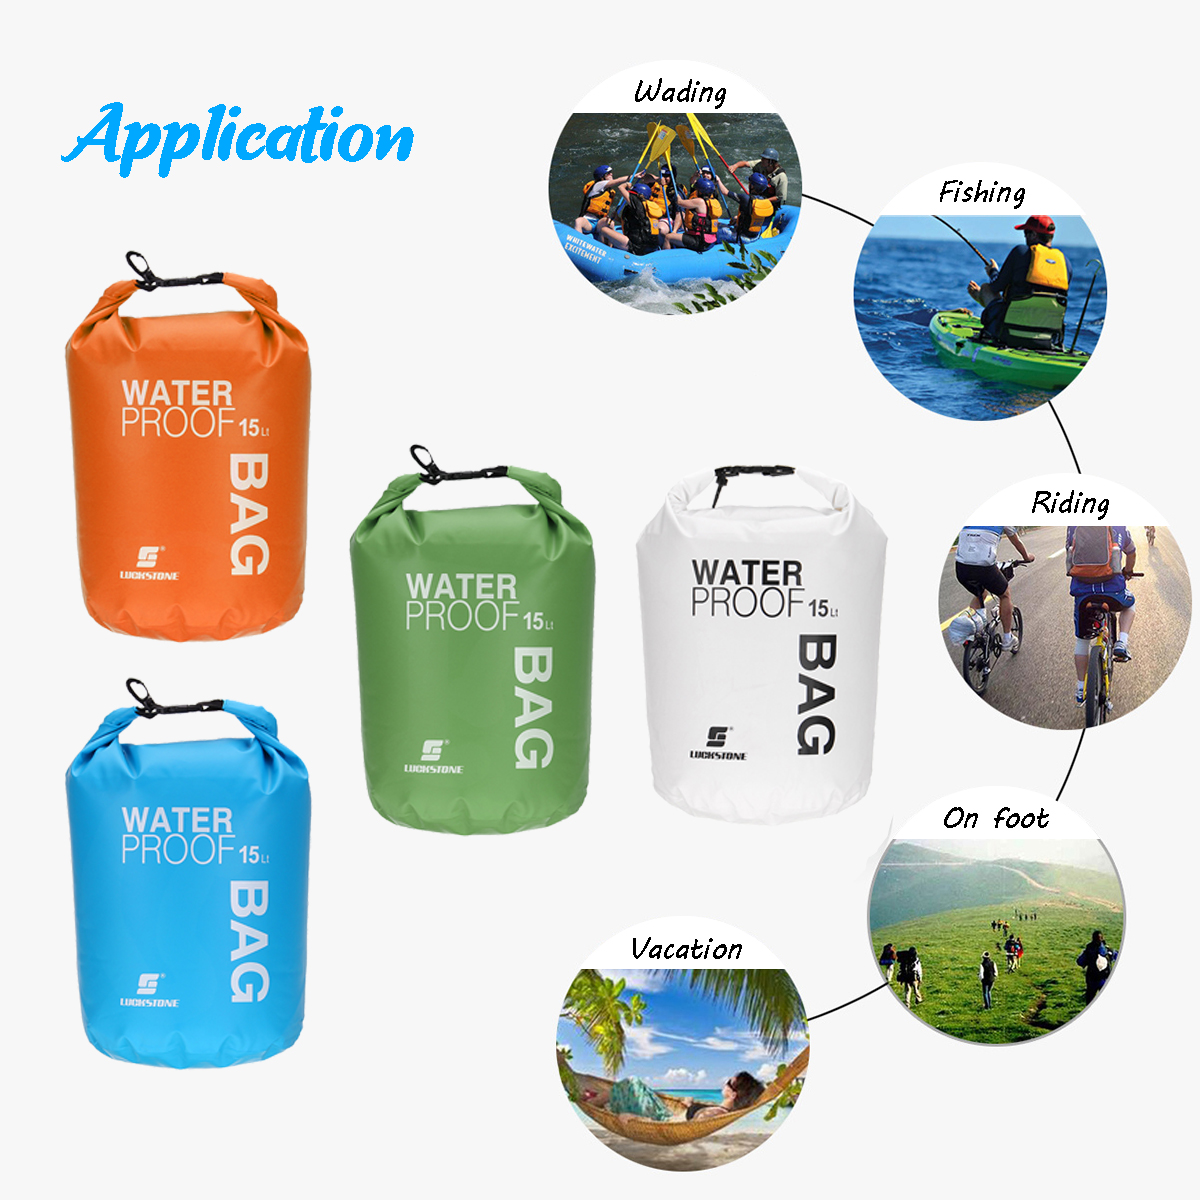 15L-Outdoor-Swimming-Air-Inflation-Floating-Mobile-Phone-Camera-Storage-PVC-Waterproof-Bag-1820816-5